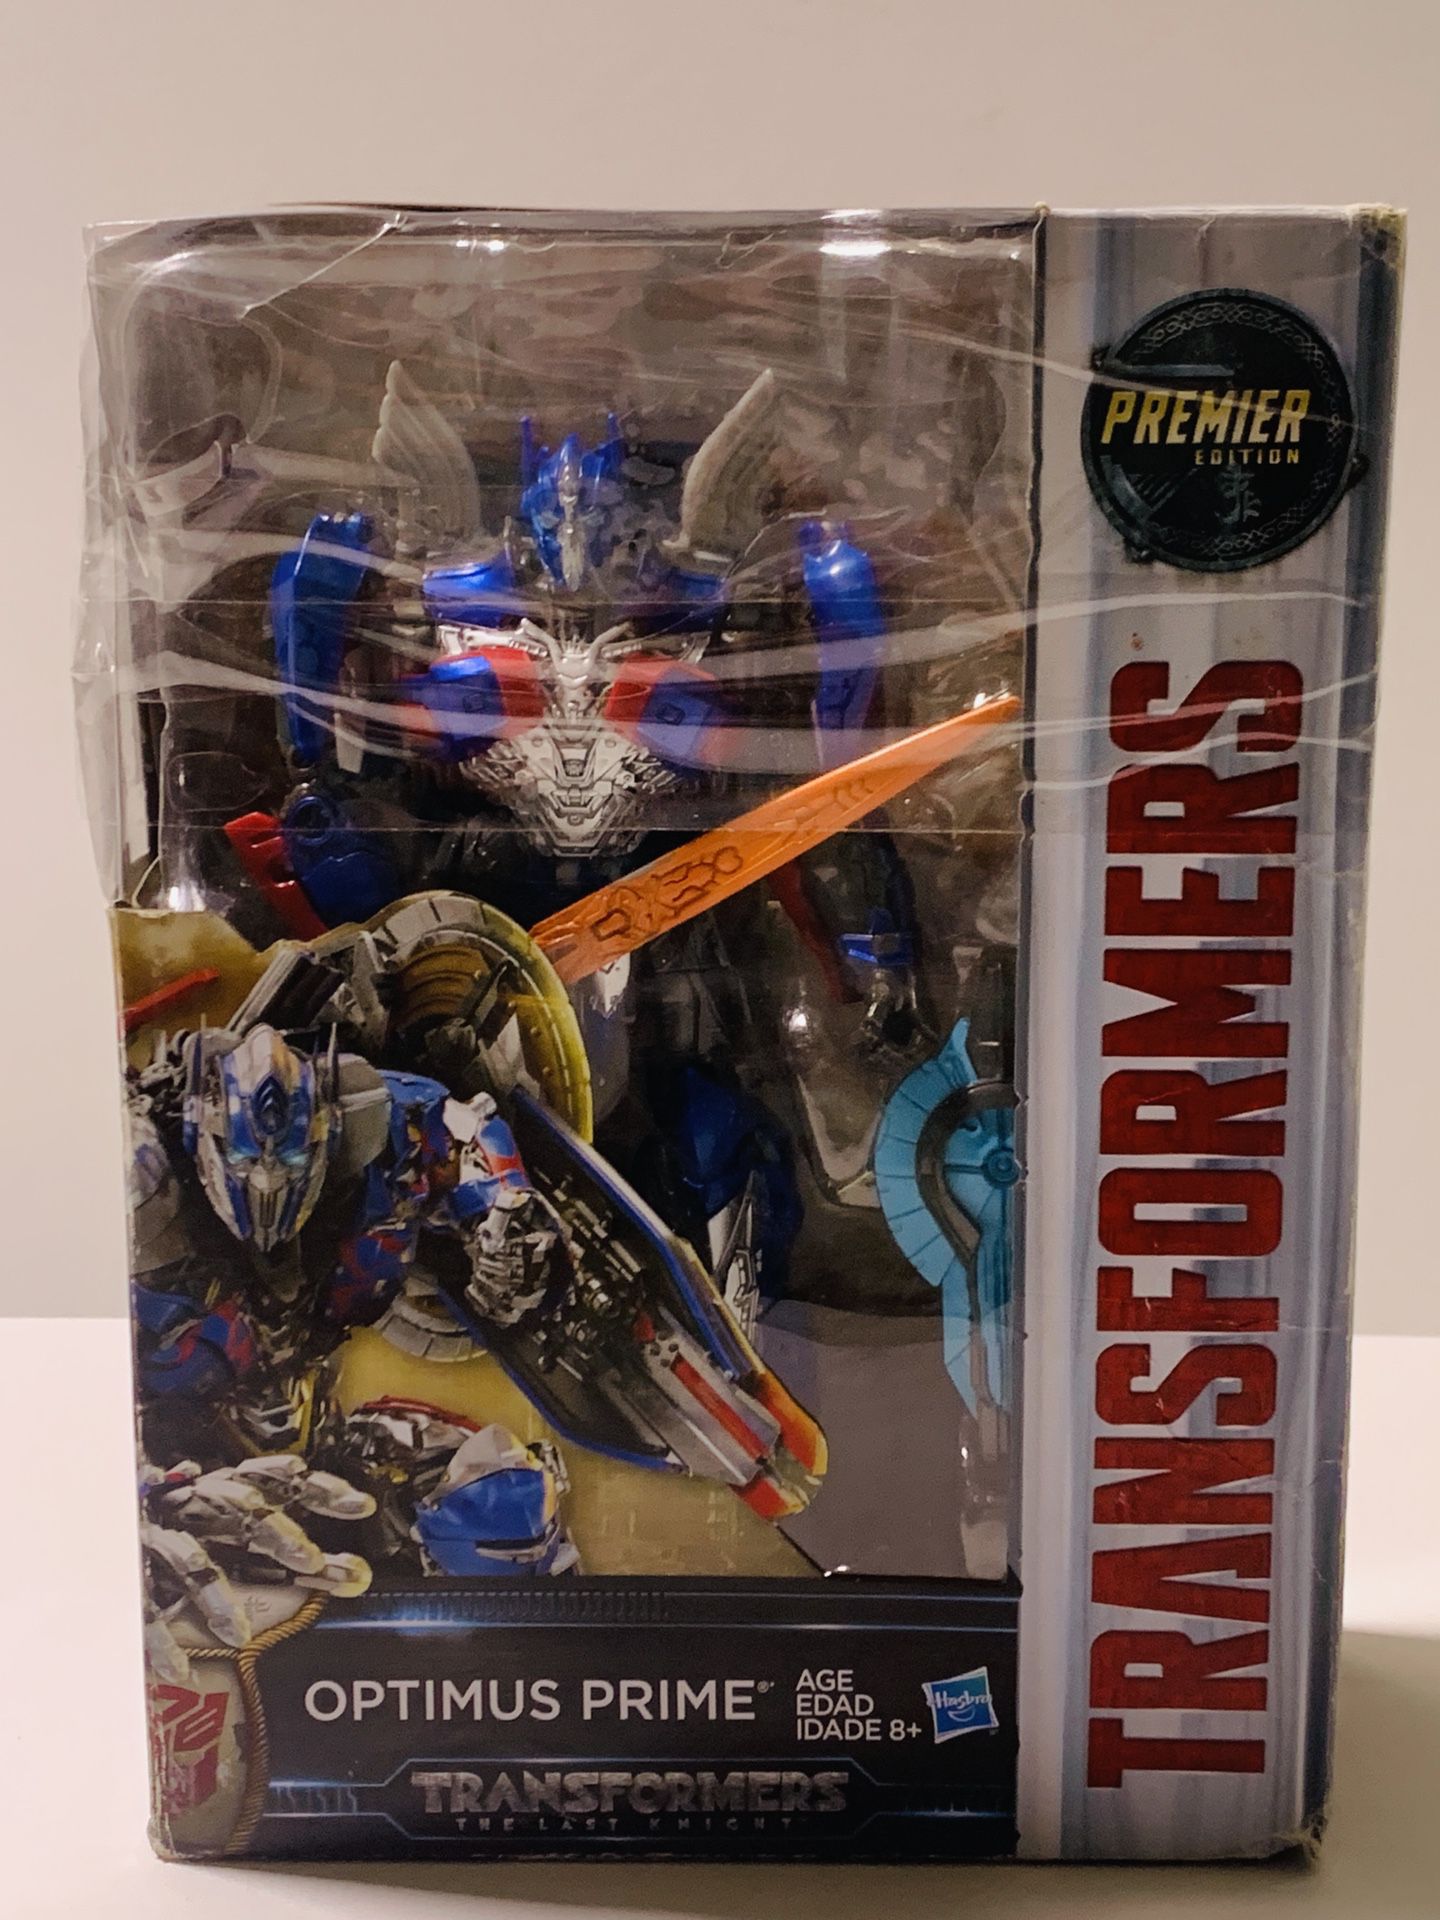 Hasbro Transformers The Last Knight Optimus Prime Premiere Edition Voyager Class Box is a little Damage but Figure is Great